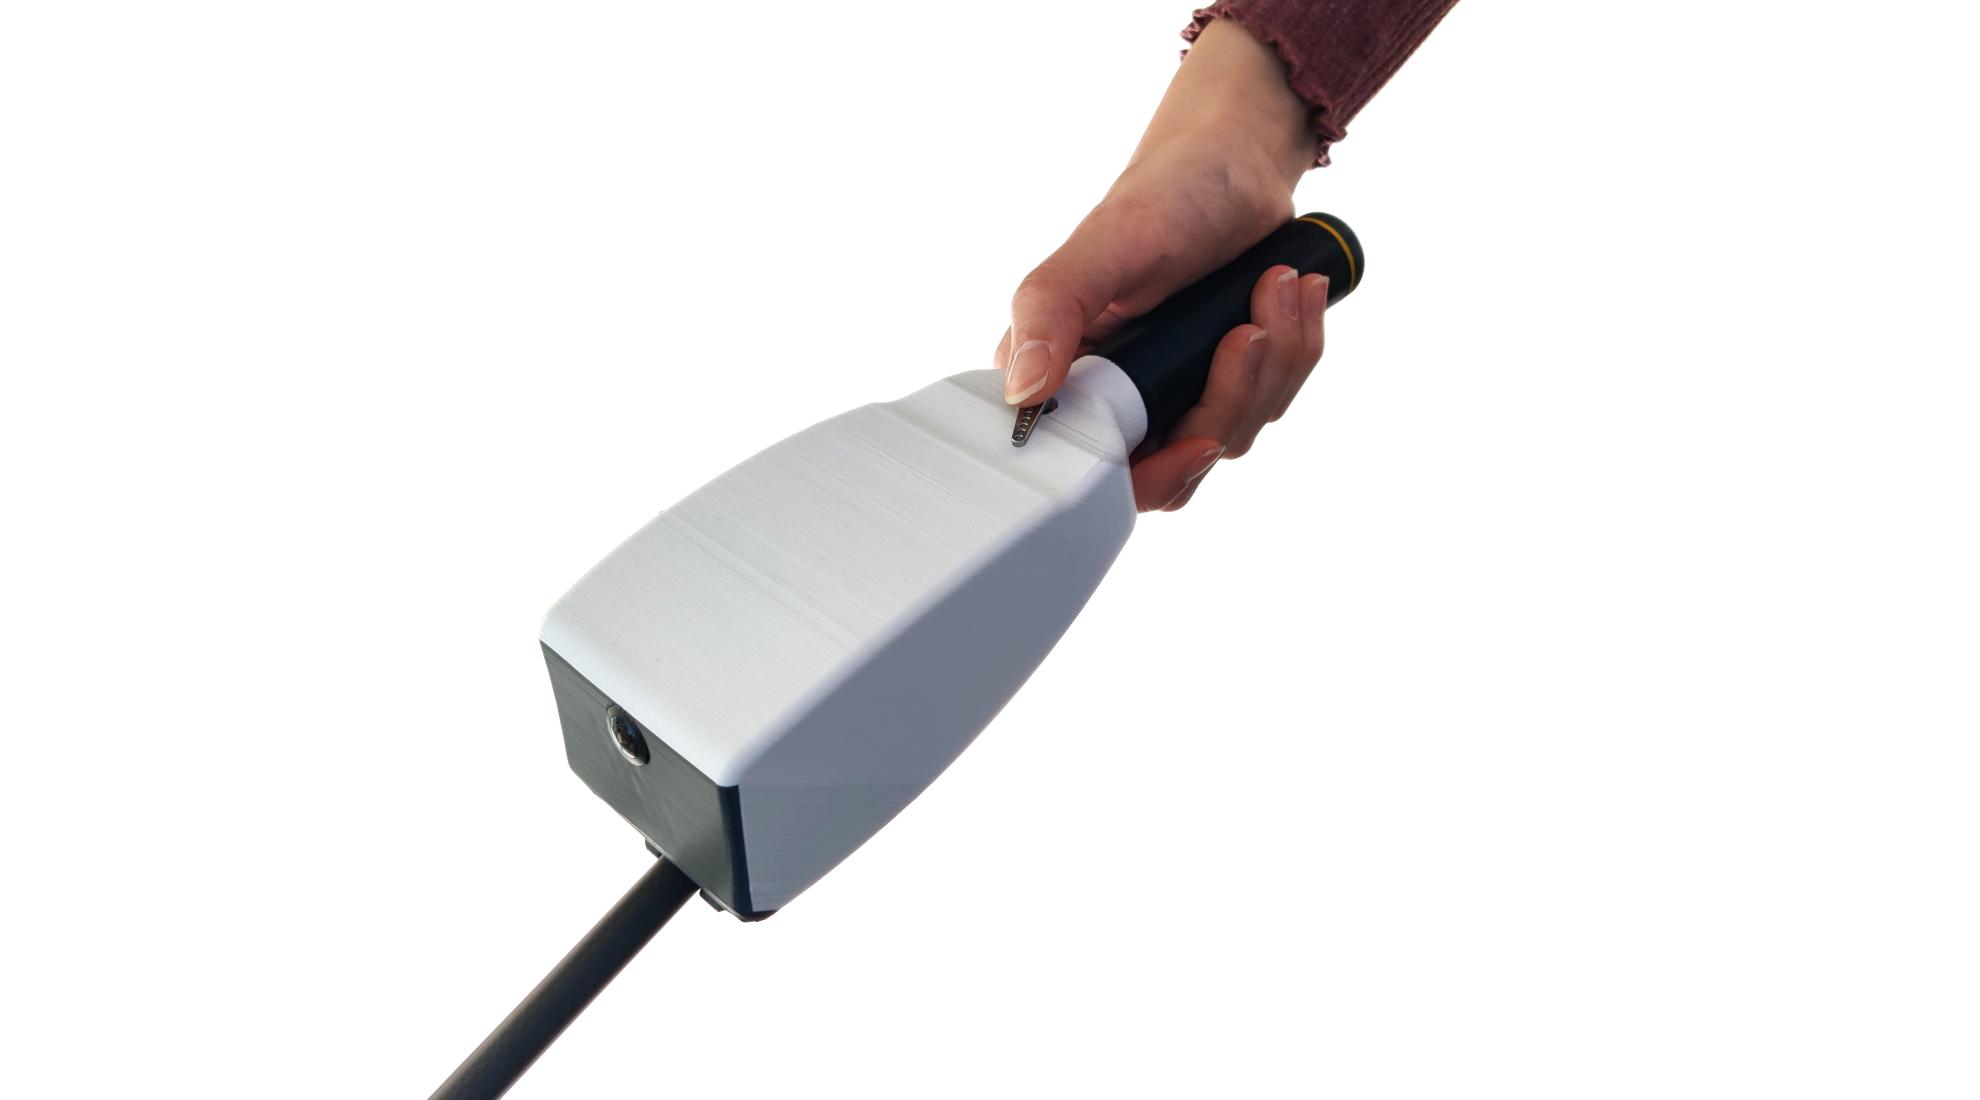 Smart cane for blind people